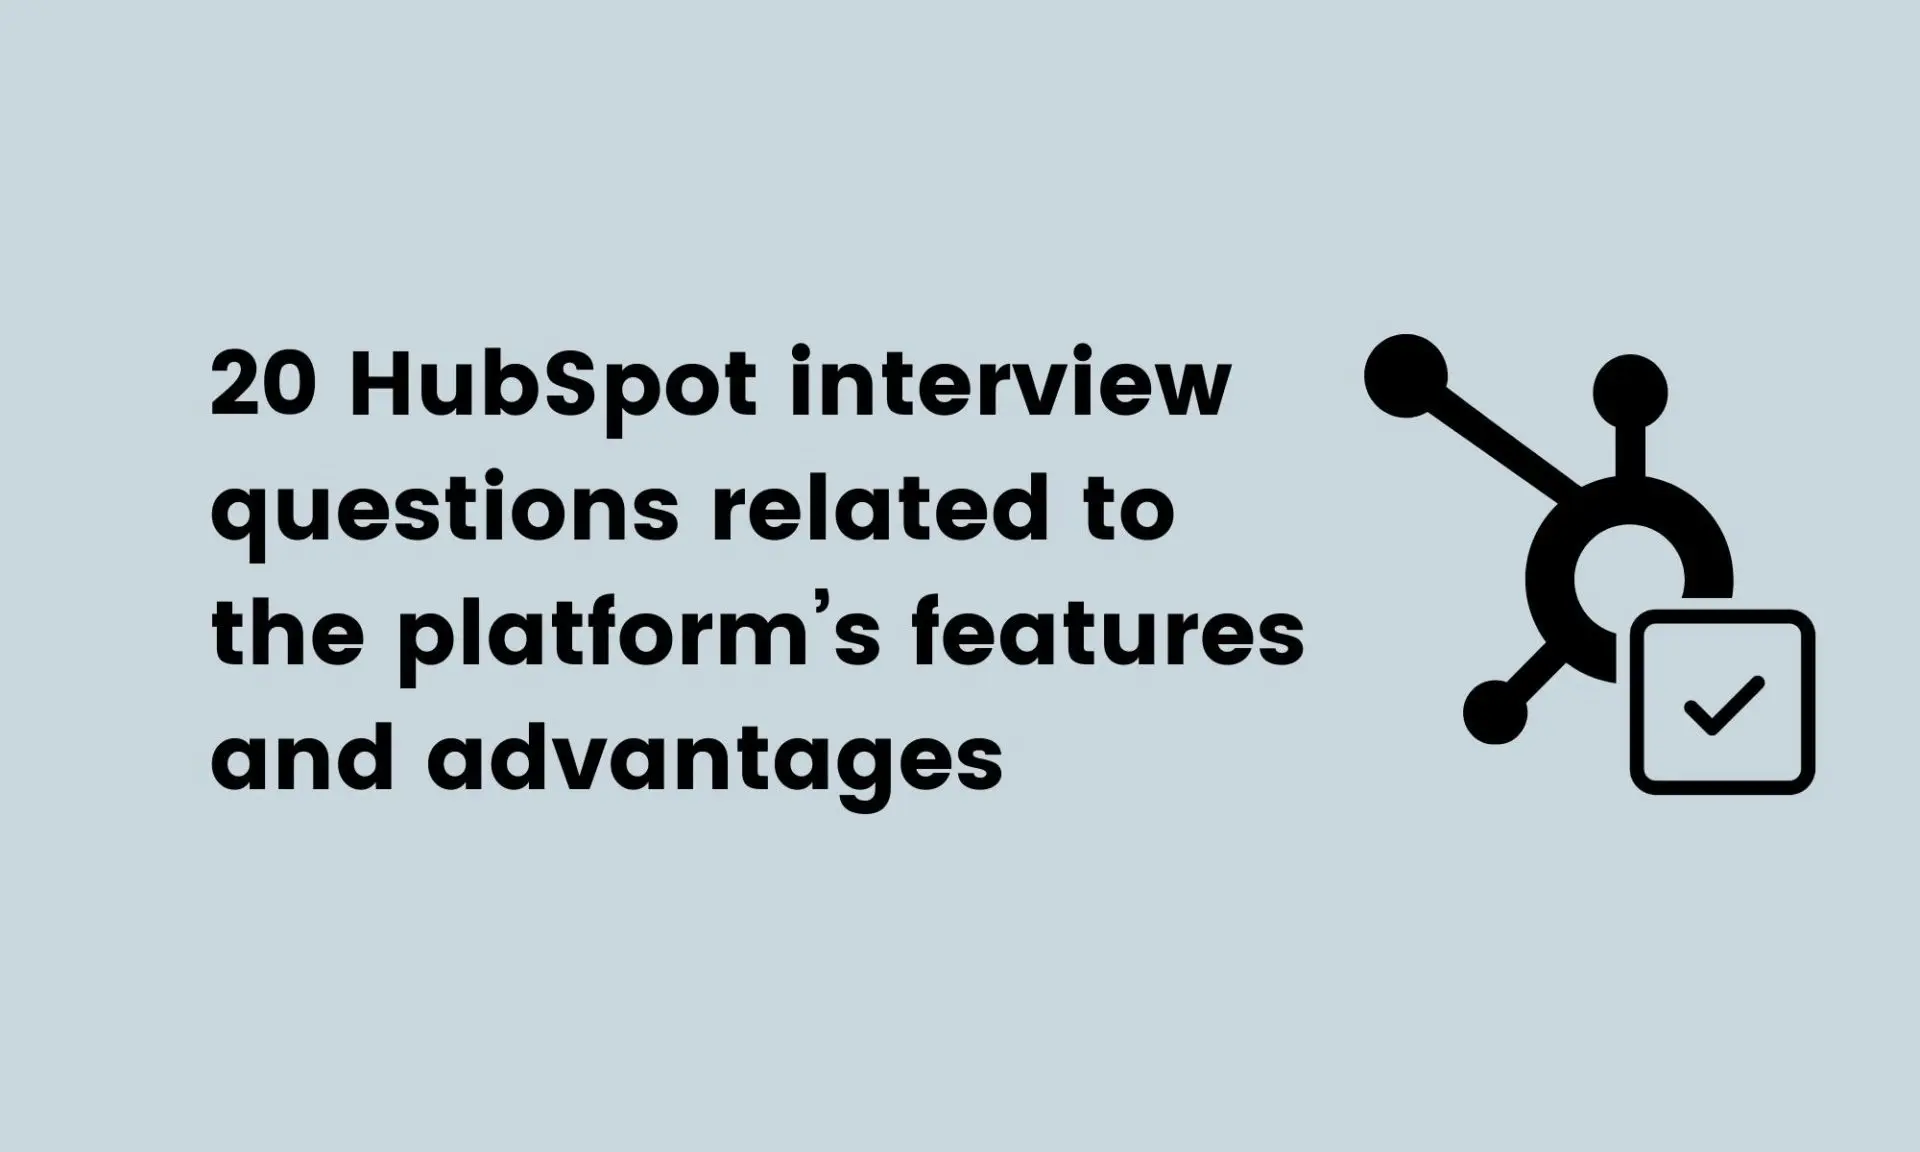 image showing 20 HubSpot interview questions related to the platform’s features and advantages